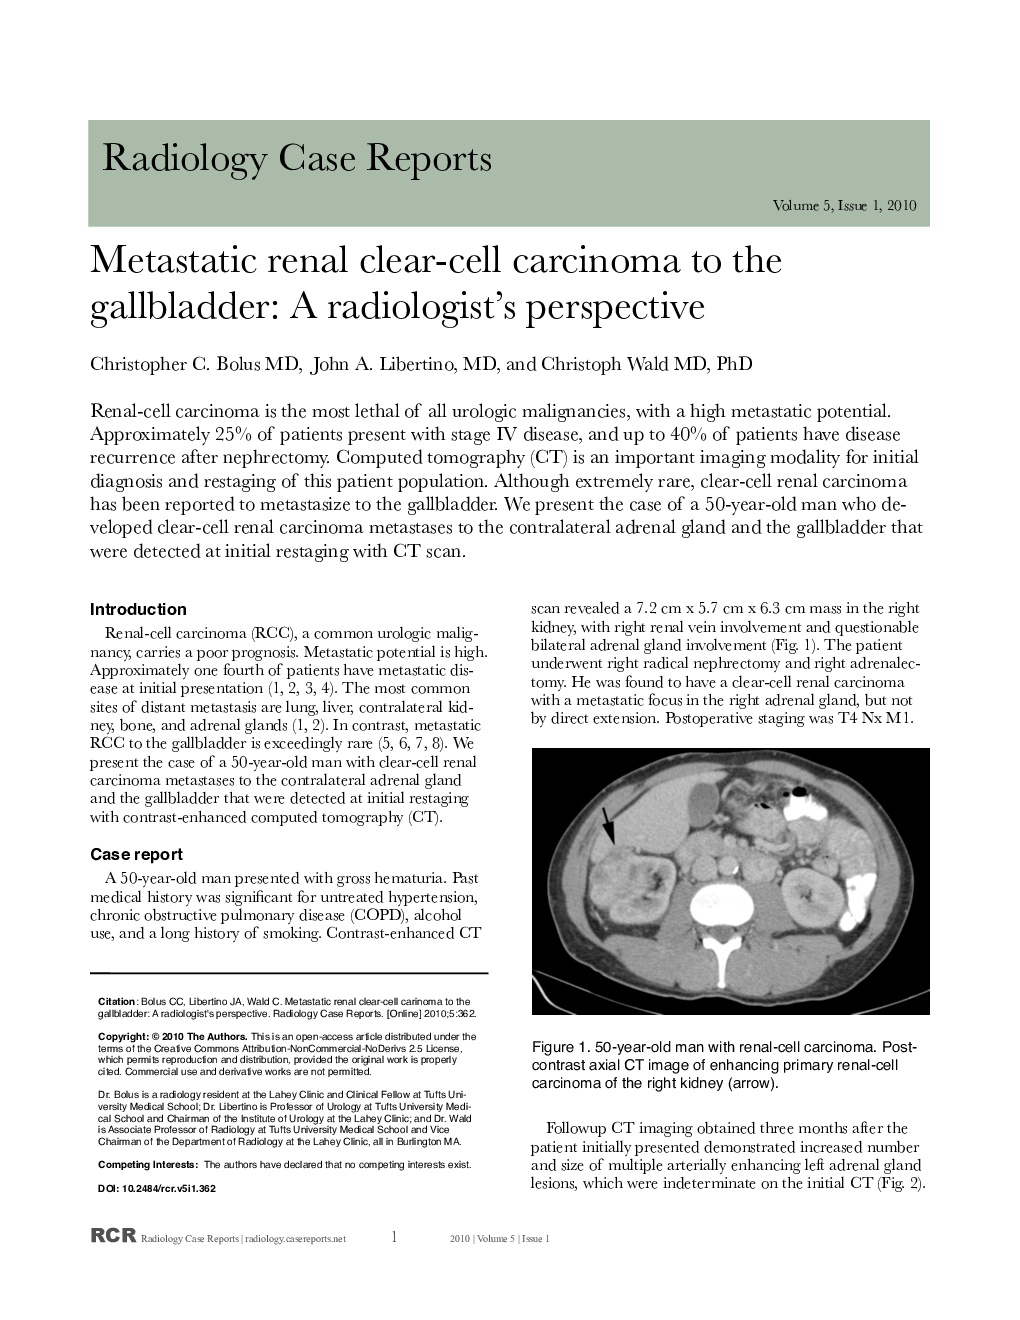 Metastatic renal clear-cell carcinoma to the gallbladder: A radiologist's perspective